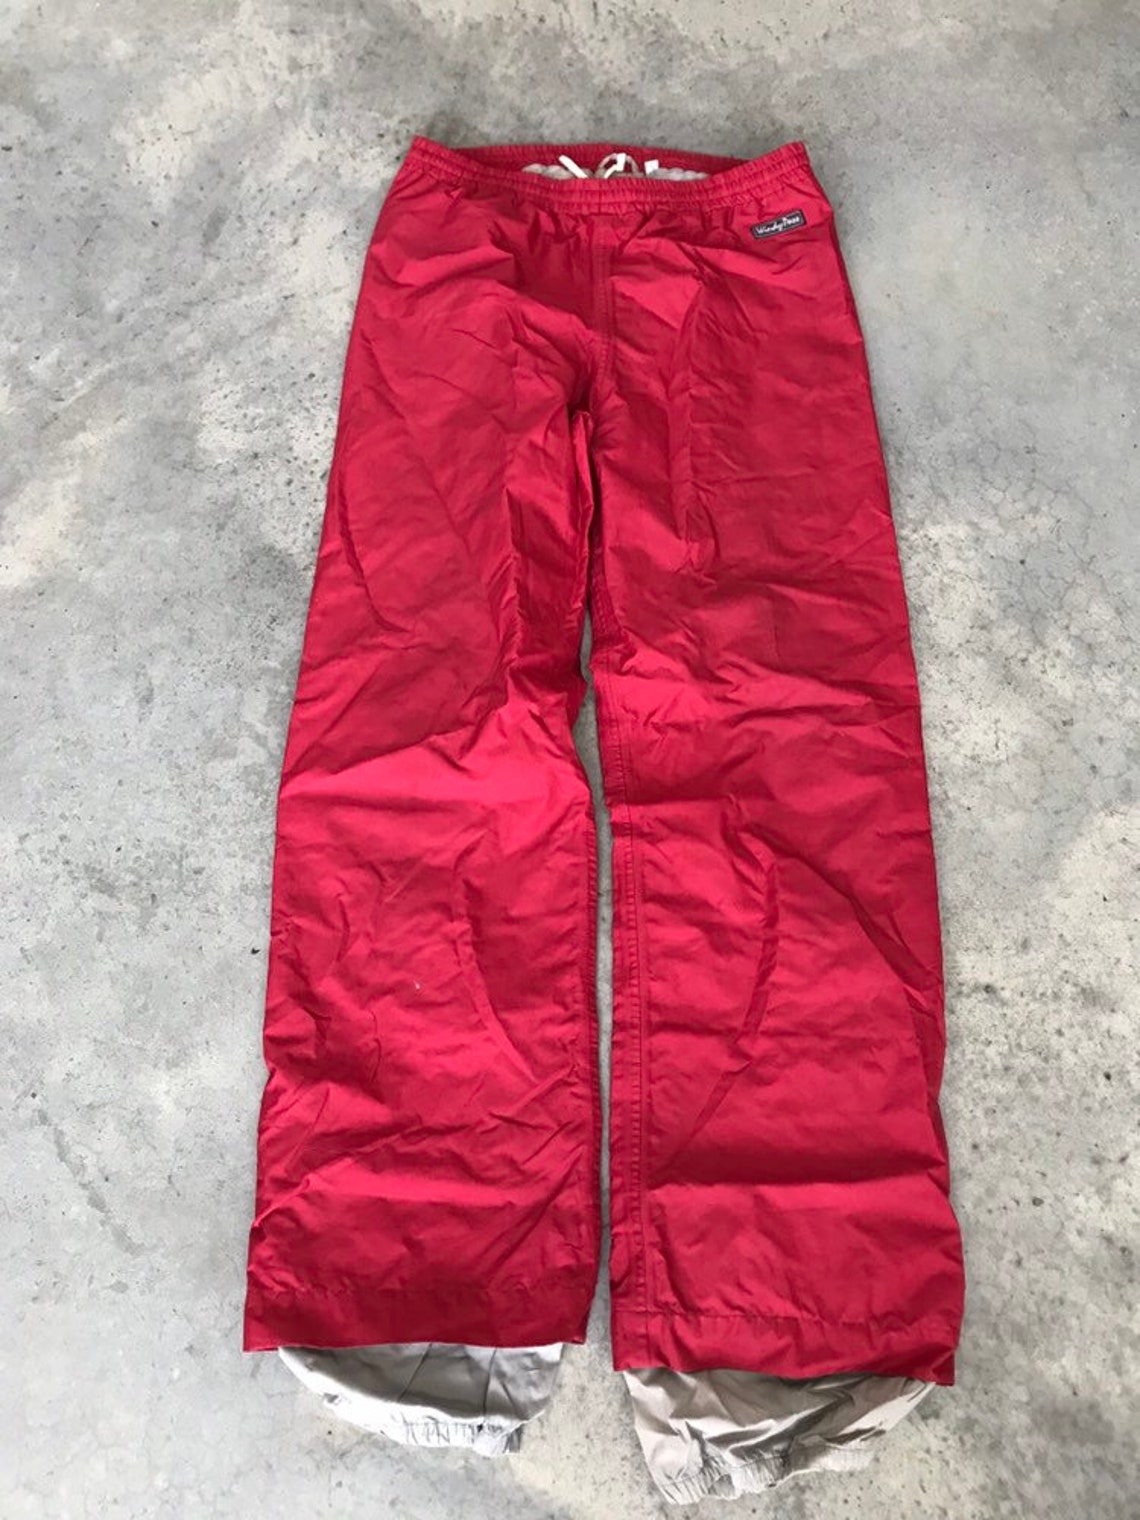 Vintage The Windy Pass by The North Face Red Mens Snow Pants | Etsy